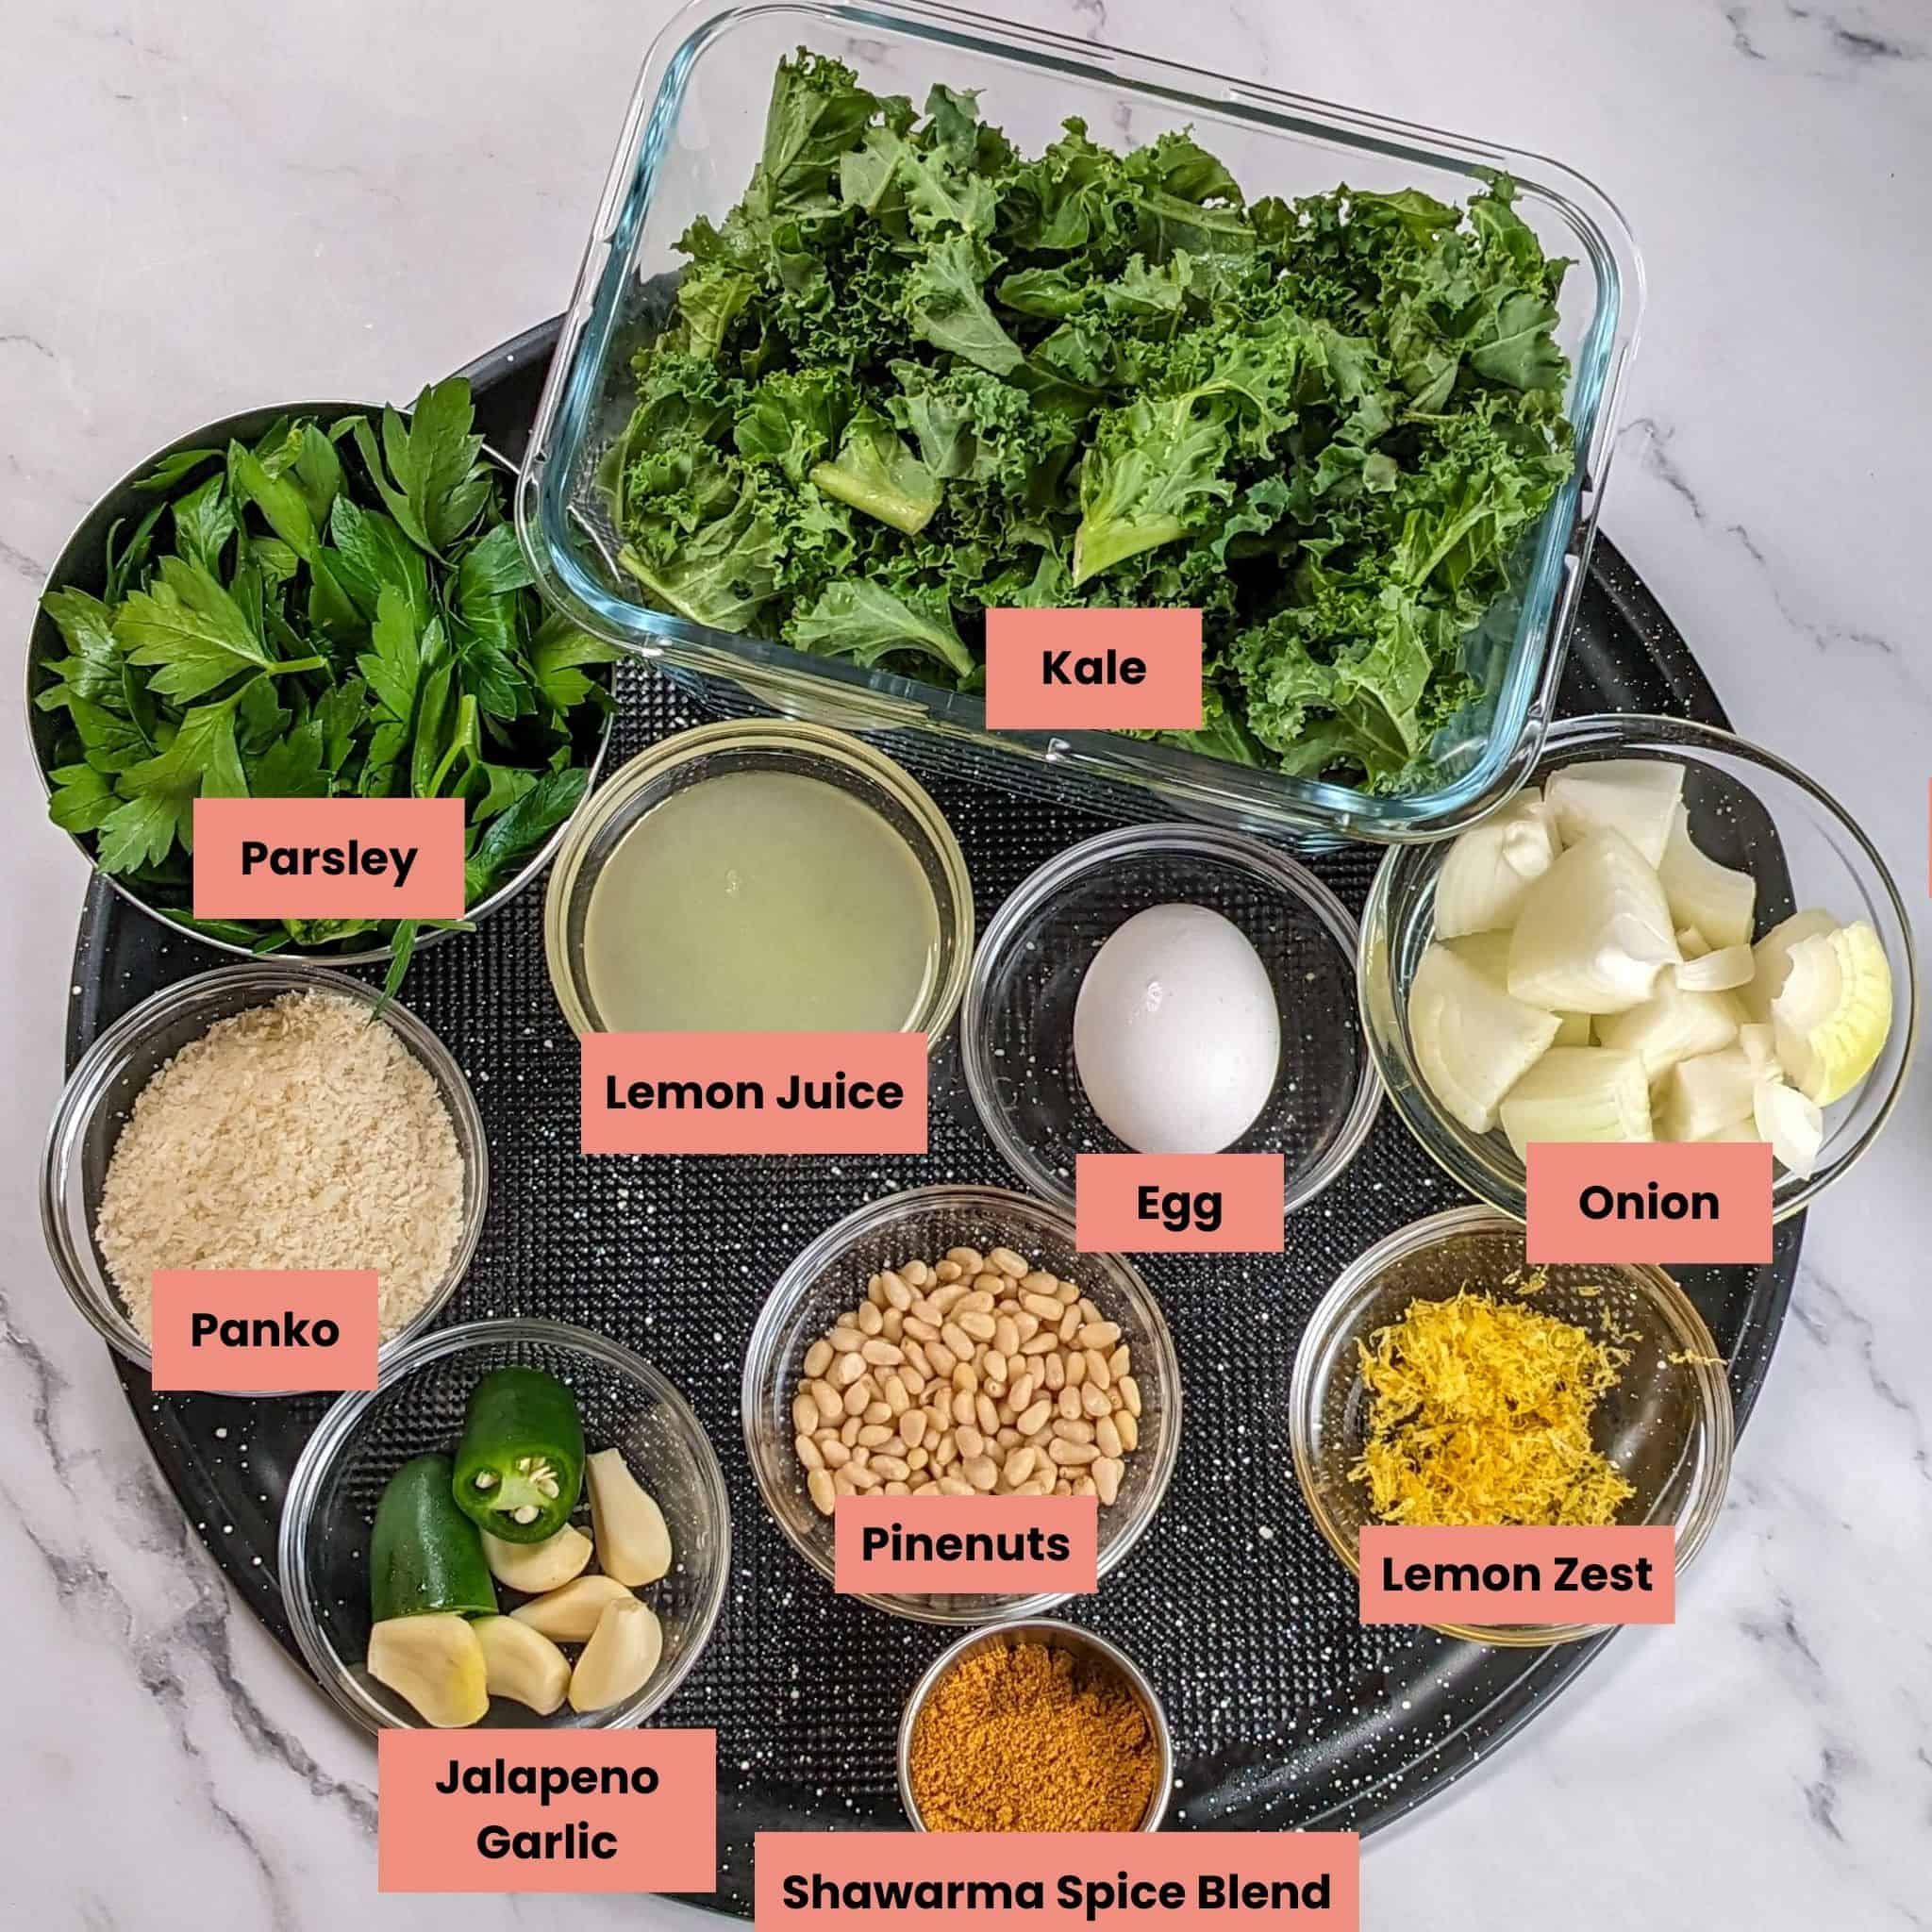 ingredients for the Spicy Turkey Meatball Kale Soup in containers on a large round pizza pan.